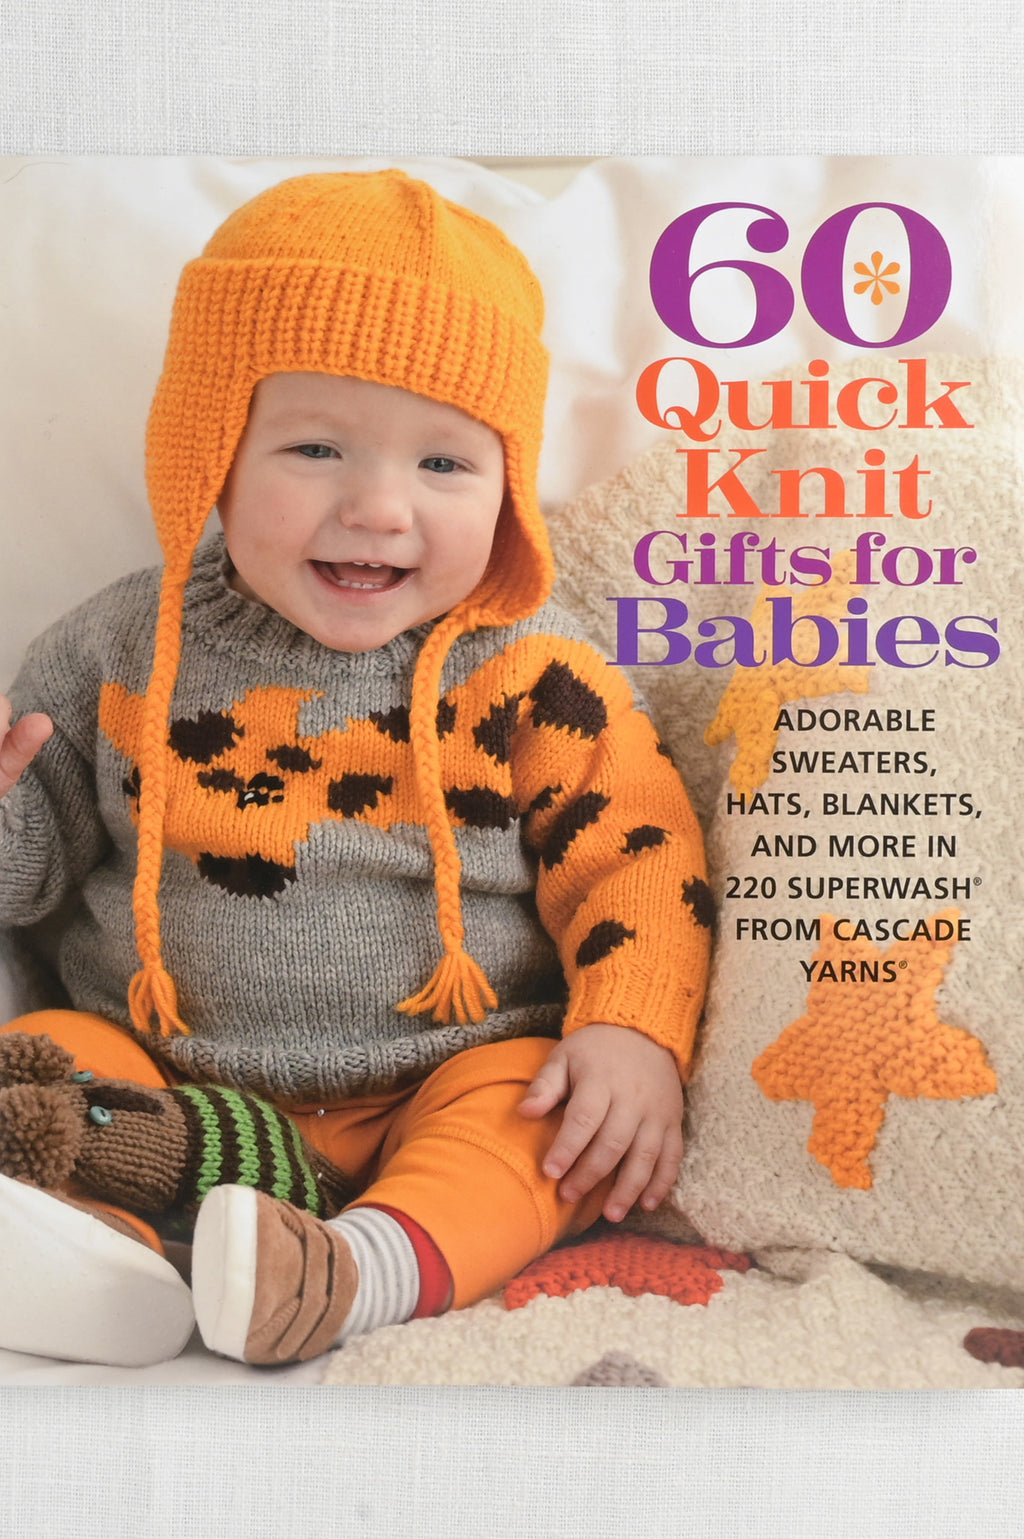 knitting patterns Archives - Our Daily Craft